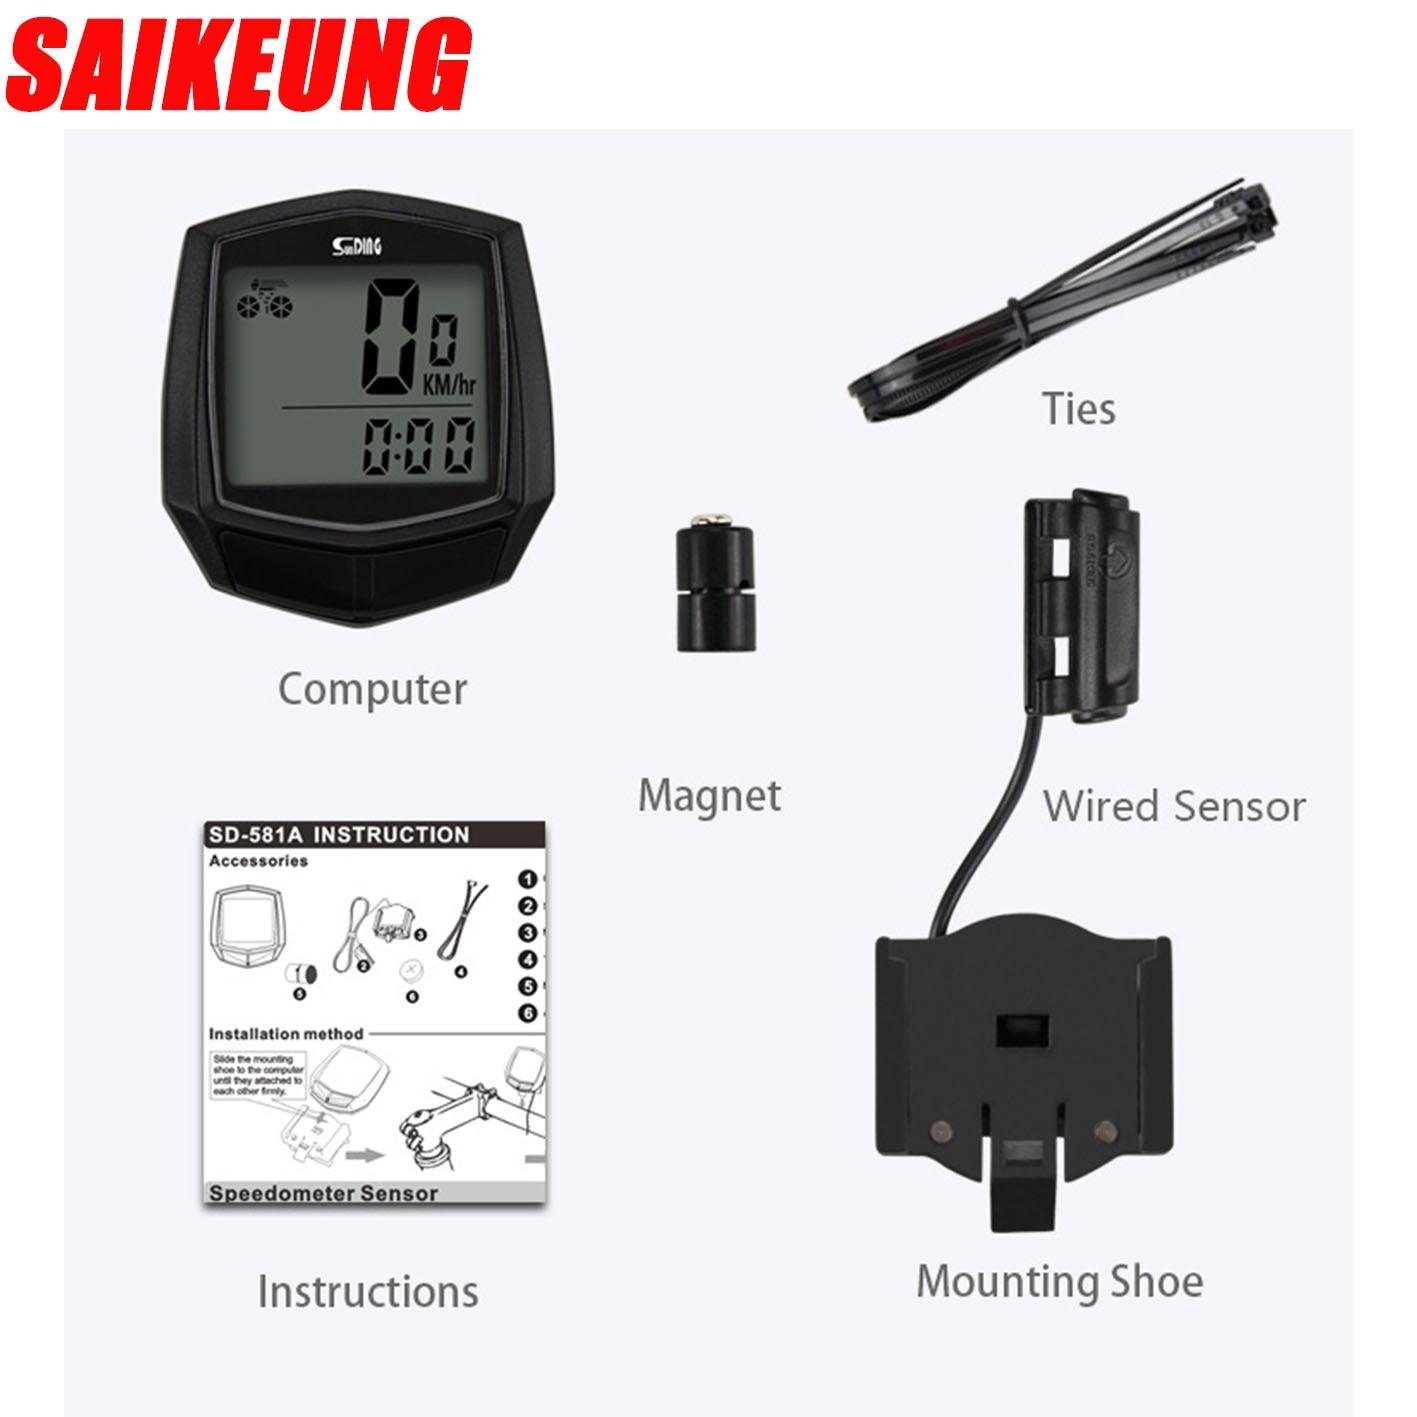 SaiKeung Bicycle Accessories Waterproof Wired Digital Bike Ride Speedometer Odometer Bicycle Cycling Speed Counter Code Table - Pogo Cycles